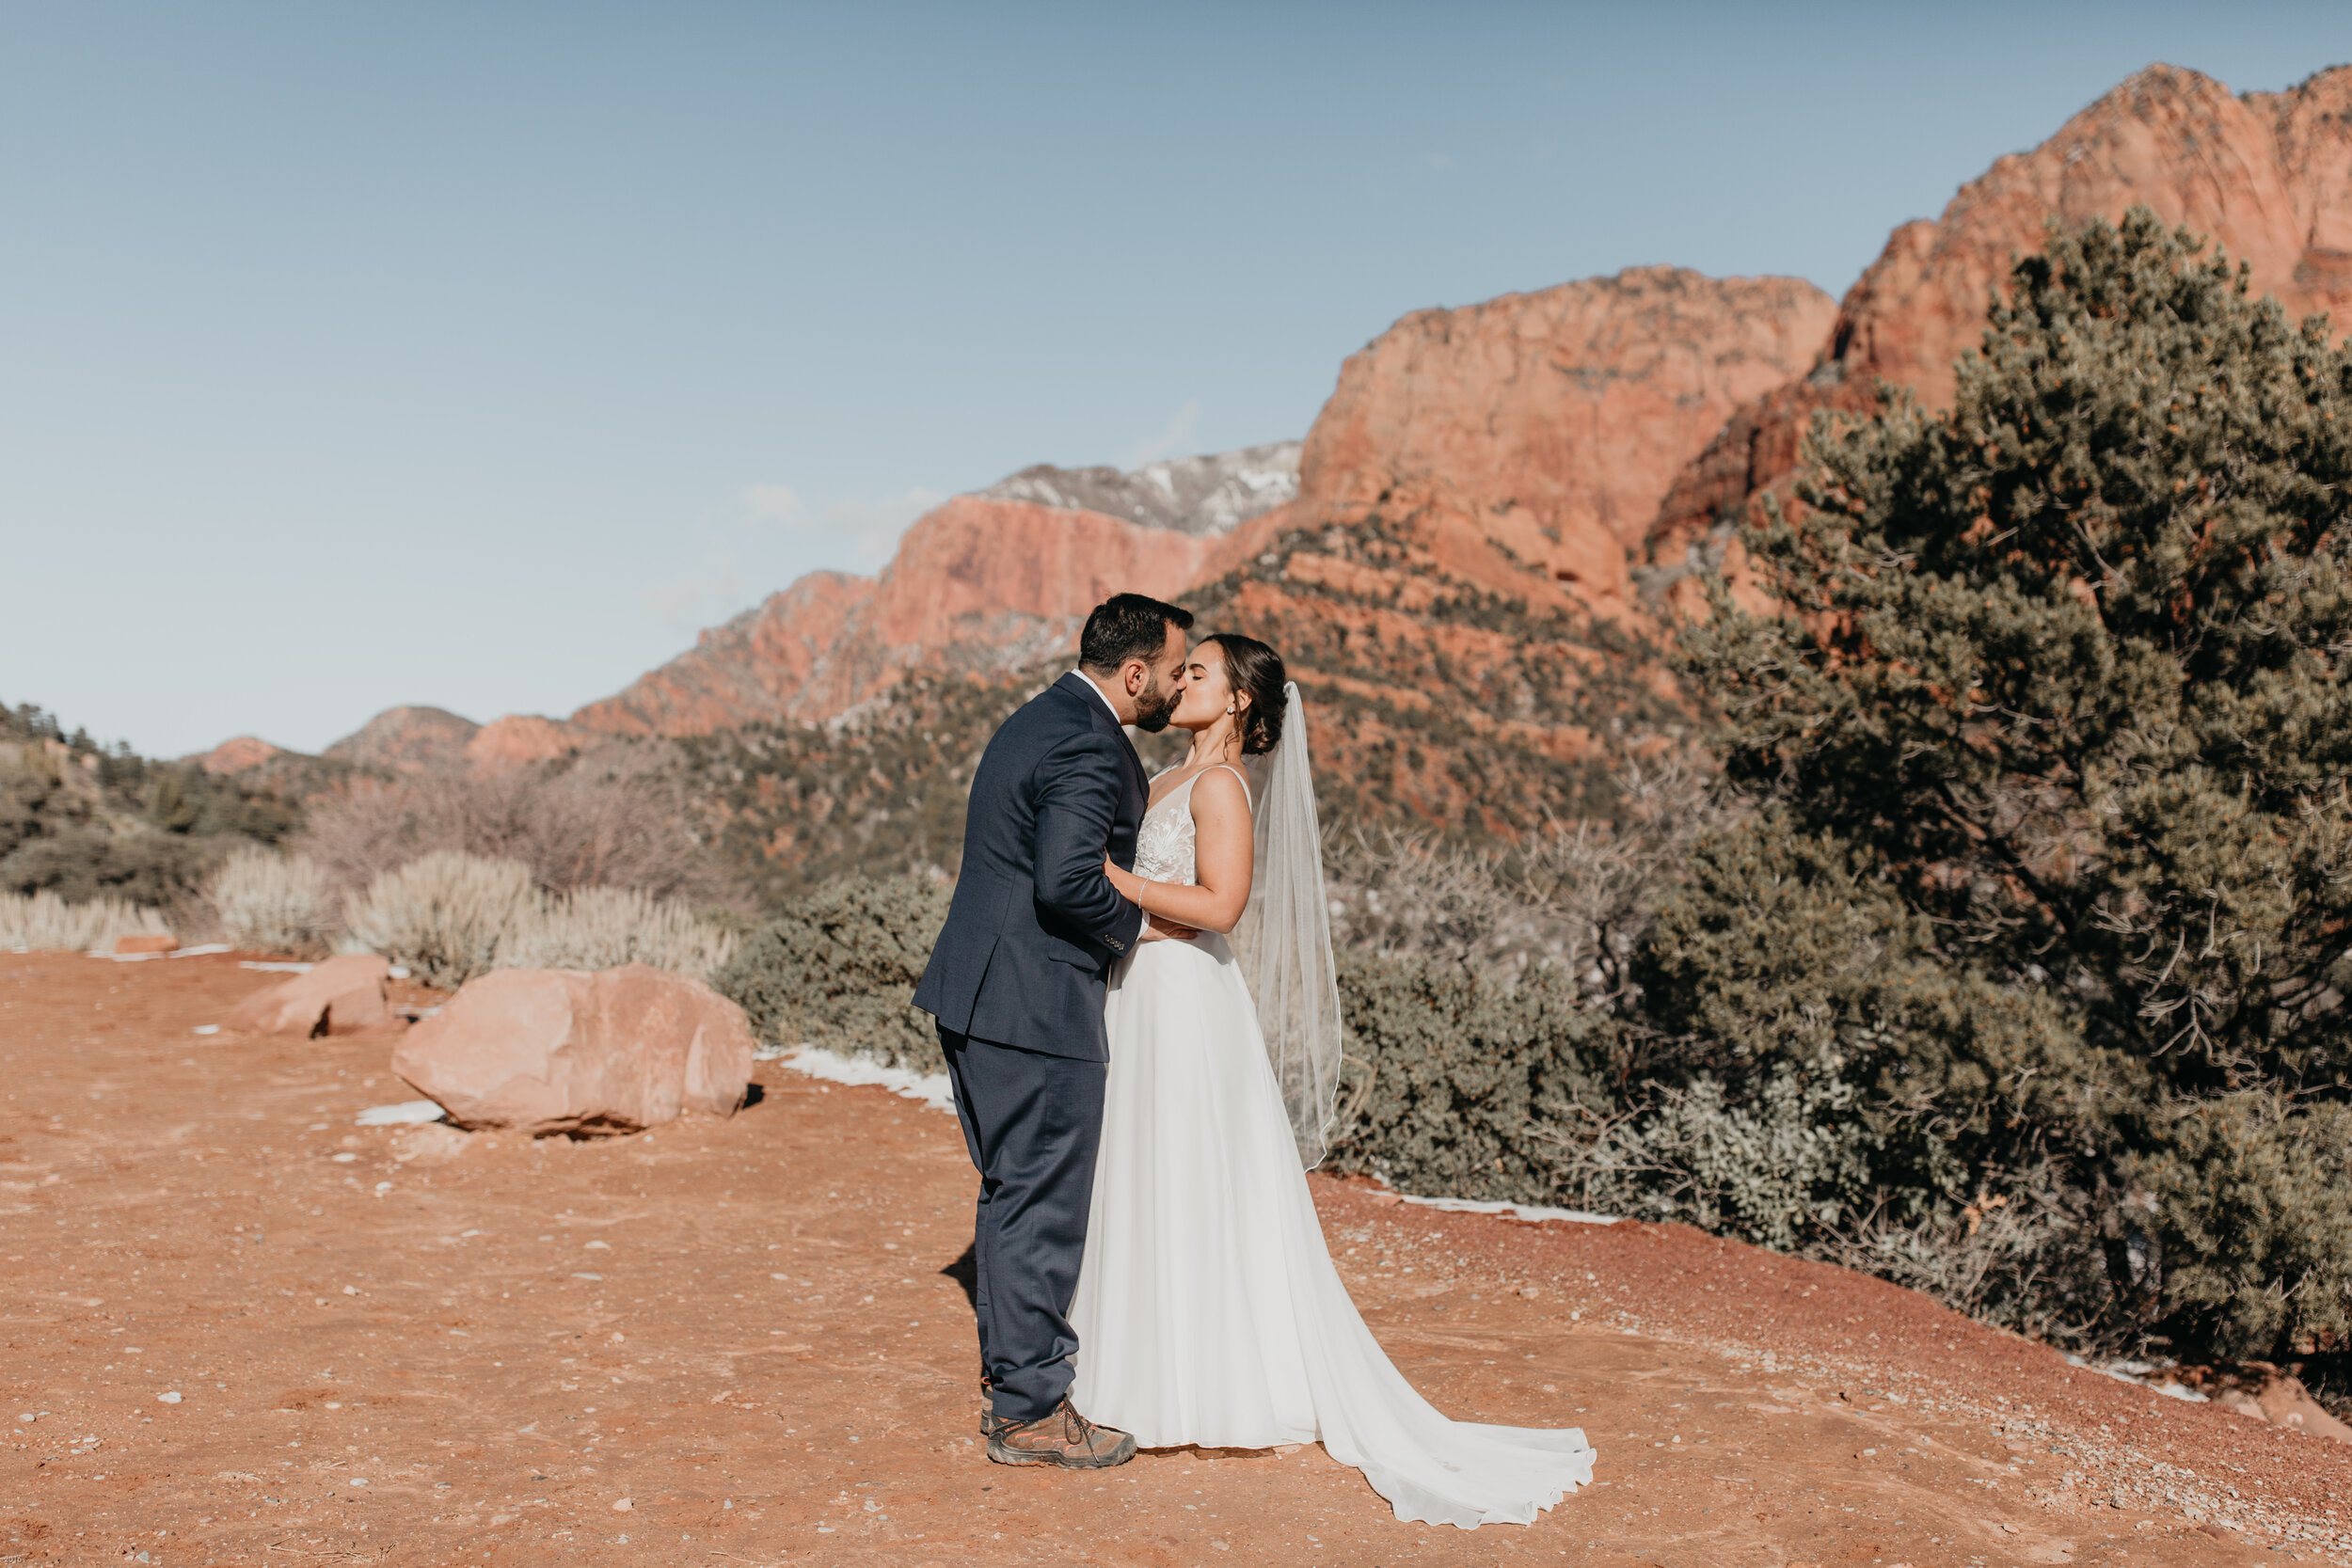 Nicole-Daacke-Photography-snowy-hiking-elopement-in-zion-national-park-zion-elopement-photographer-canyon-overlook-trial-brial-portraits-in-mt-zion-national-park-utah-desert-adventure-elopement-photographer-106.jpg